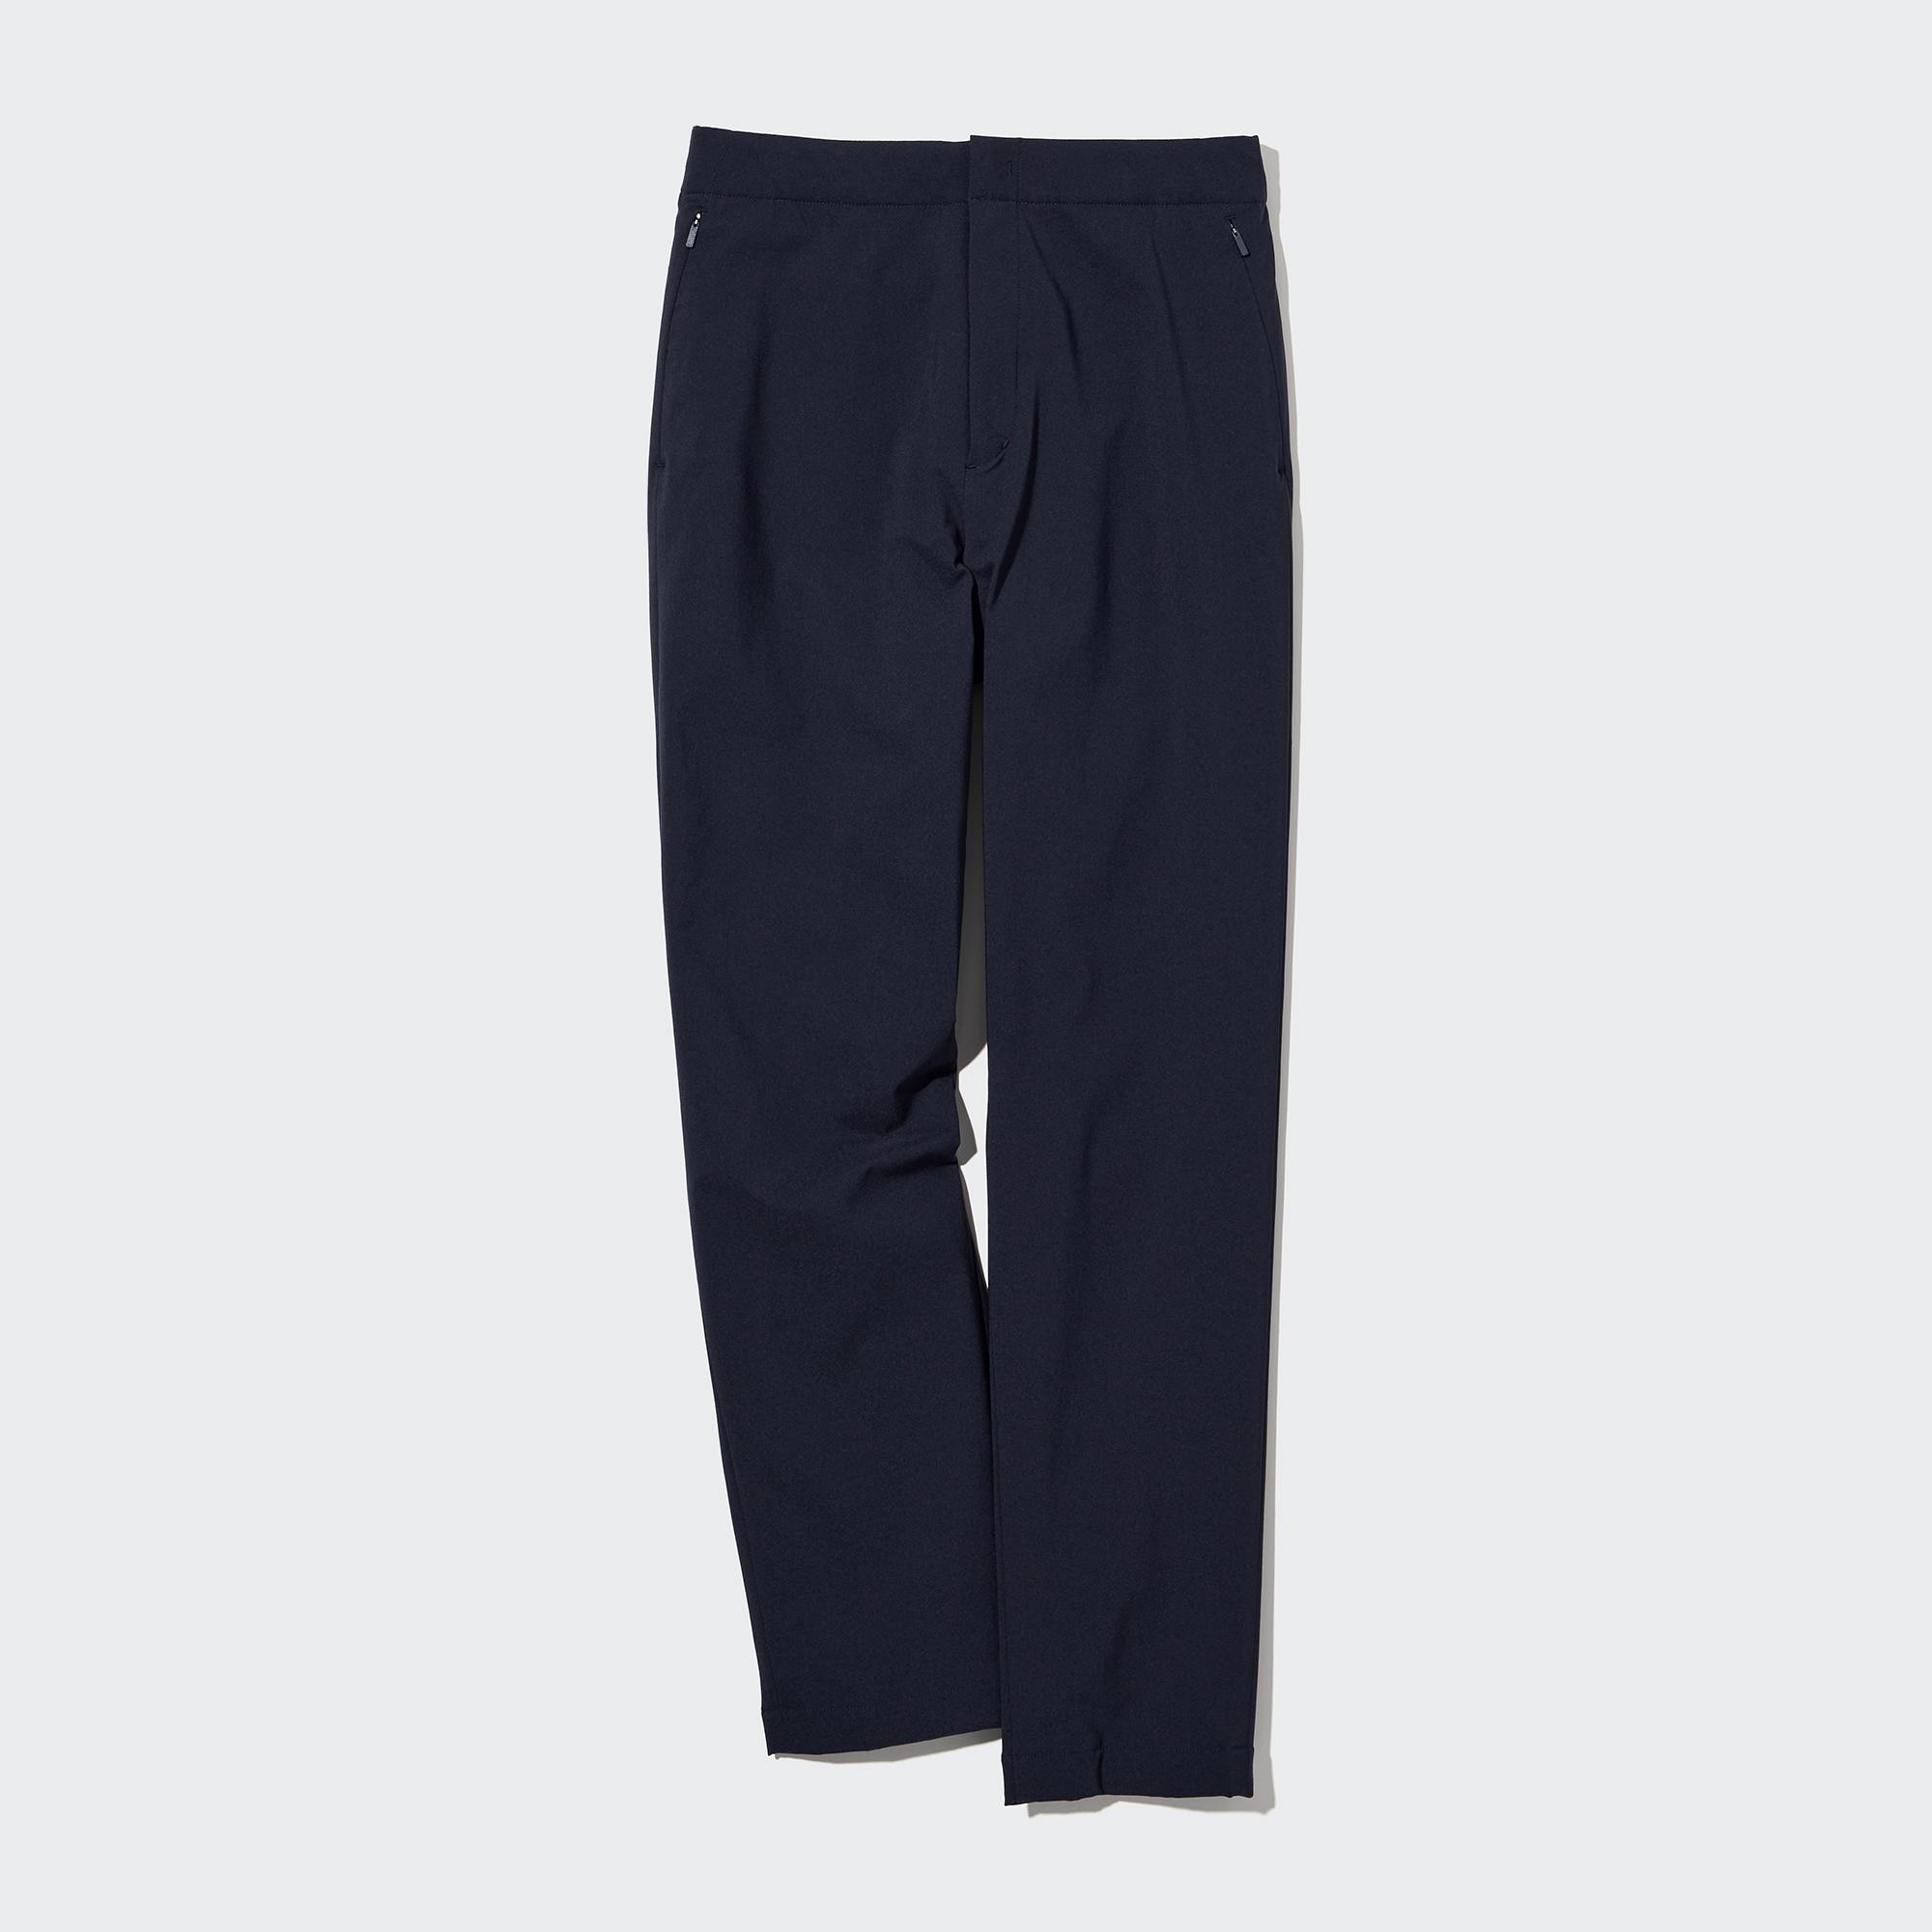 UNIQLO Smart 2-Way Stretch Corduroy Ankle Pants | StyleHint